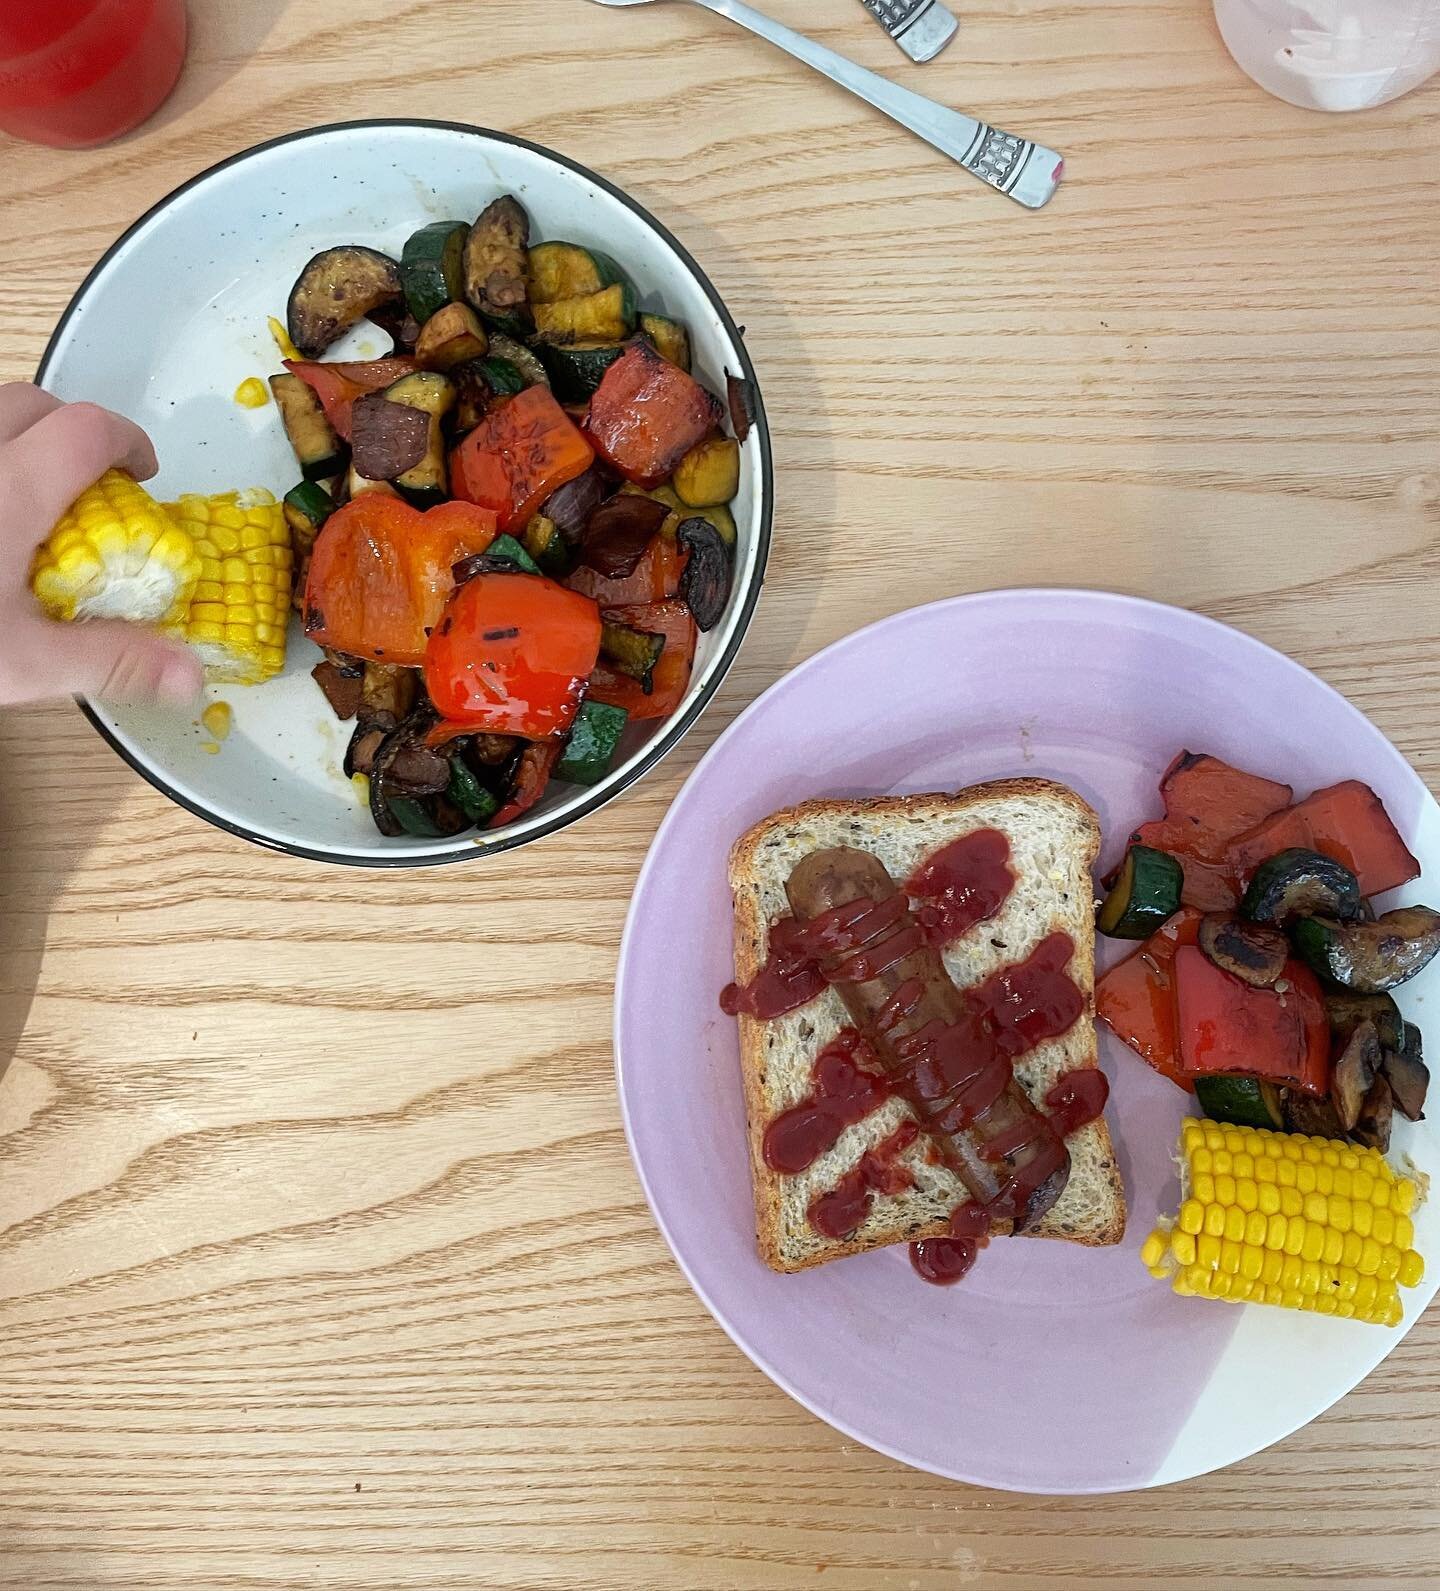 &ldquo;What do vegetarians eat at a BBQ?&rdquo; A question I&rsquo;ve been asked all my life! 

Meat eaters wonder no more, the humble veg BBQ. Veg sausage, whole grain bread and lots of sauce with a side of BBQ veg and corn 👌🏻

As a nutrition prof